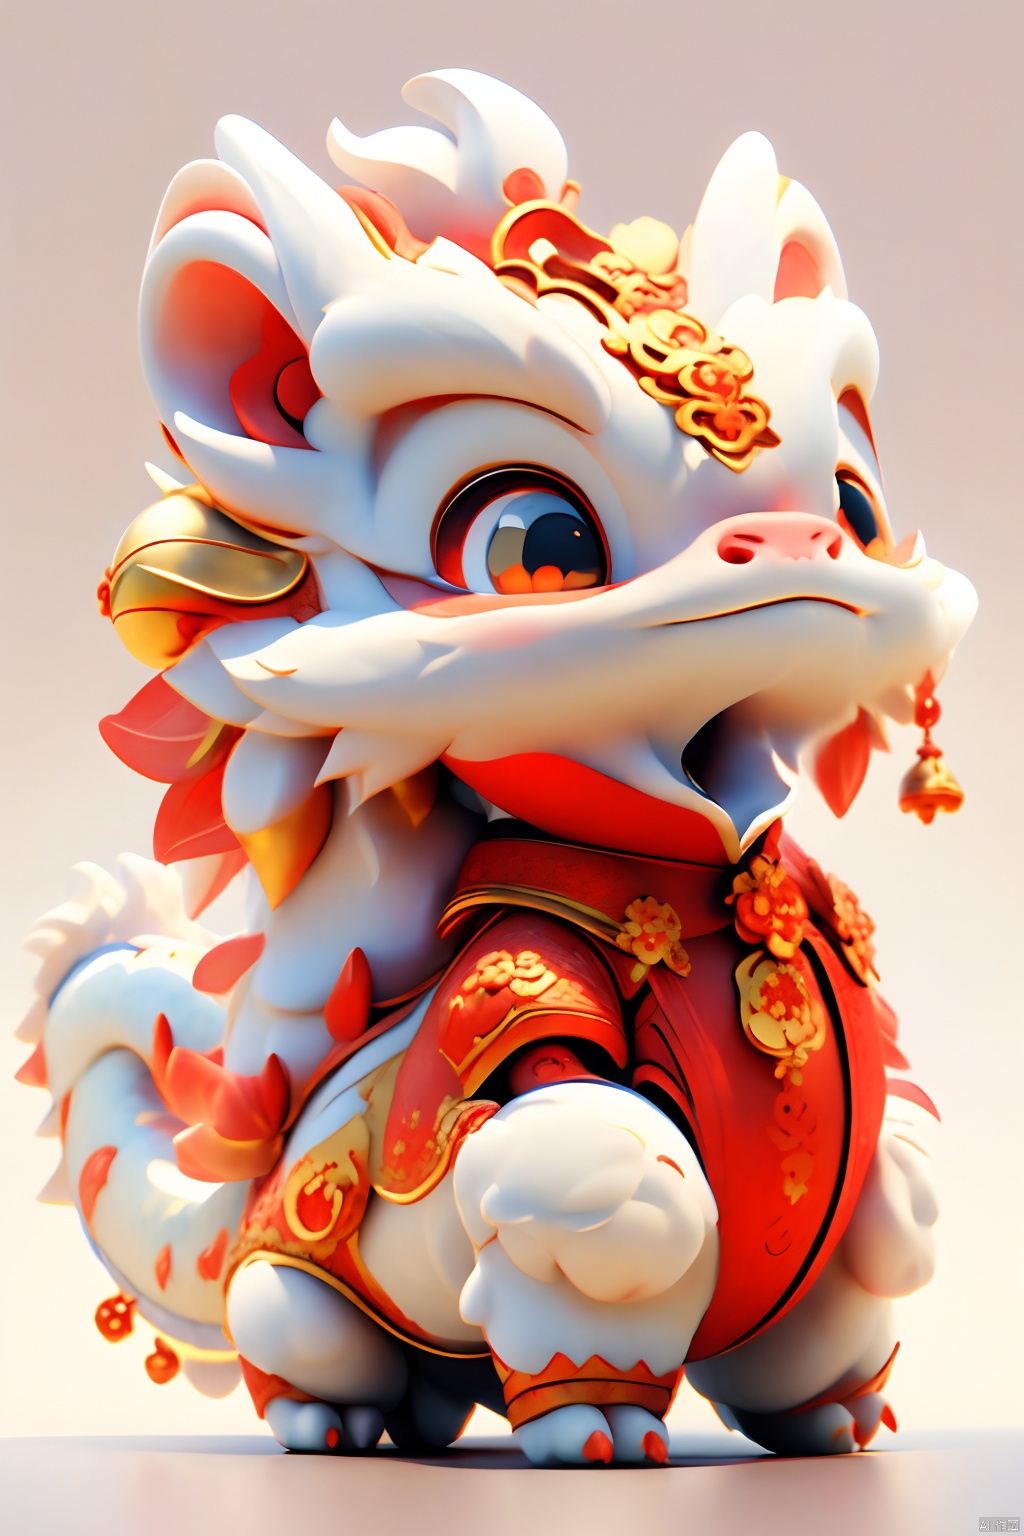  white,1dragon,Illustration cartoon cute art style,HD,Gentle art style,Enhance art style,((masterpiece)),original,rich details,extremely exquisite,red theme,Festive,lovely,,White background,Dragon design,Happy,auspicious clouds,,Blind box,Best quality,